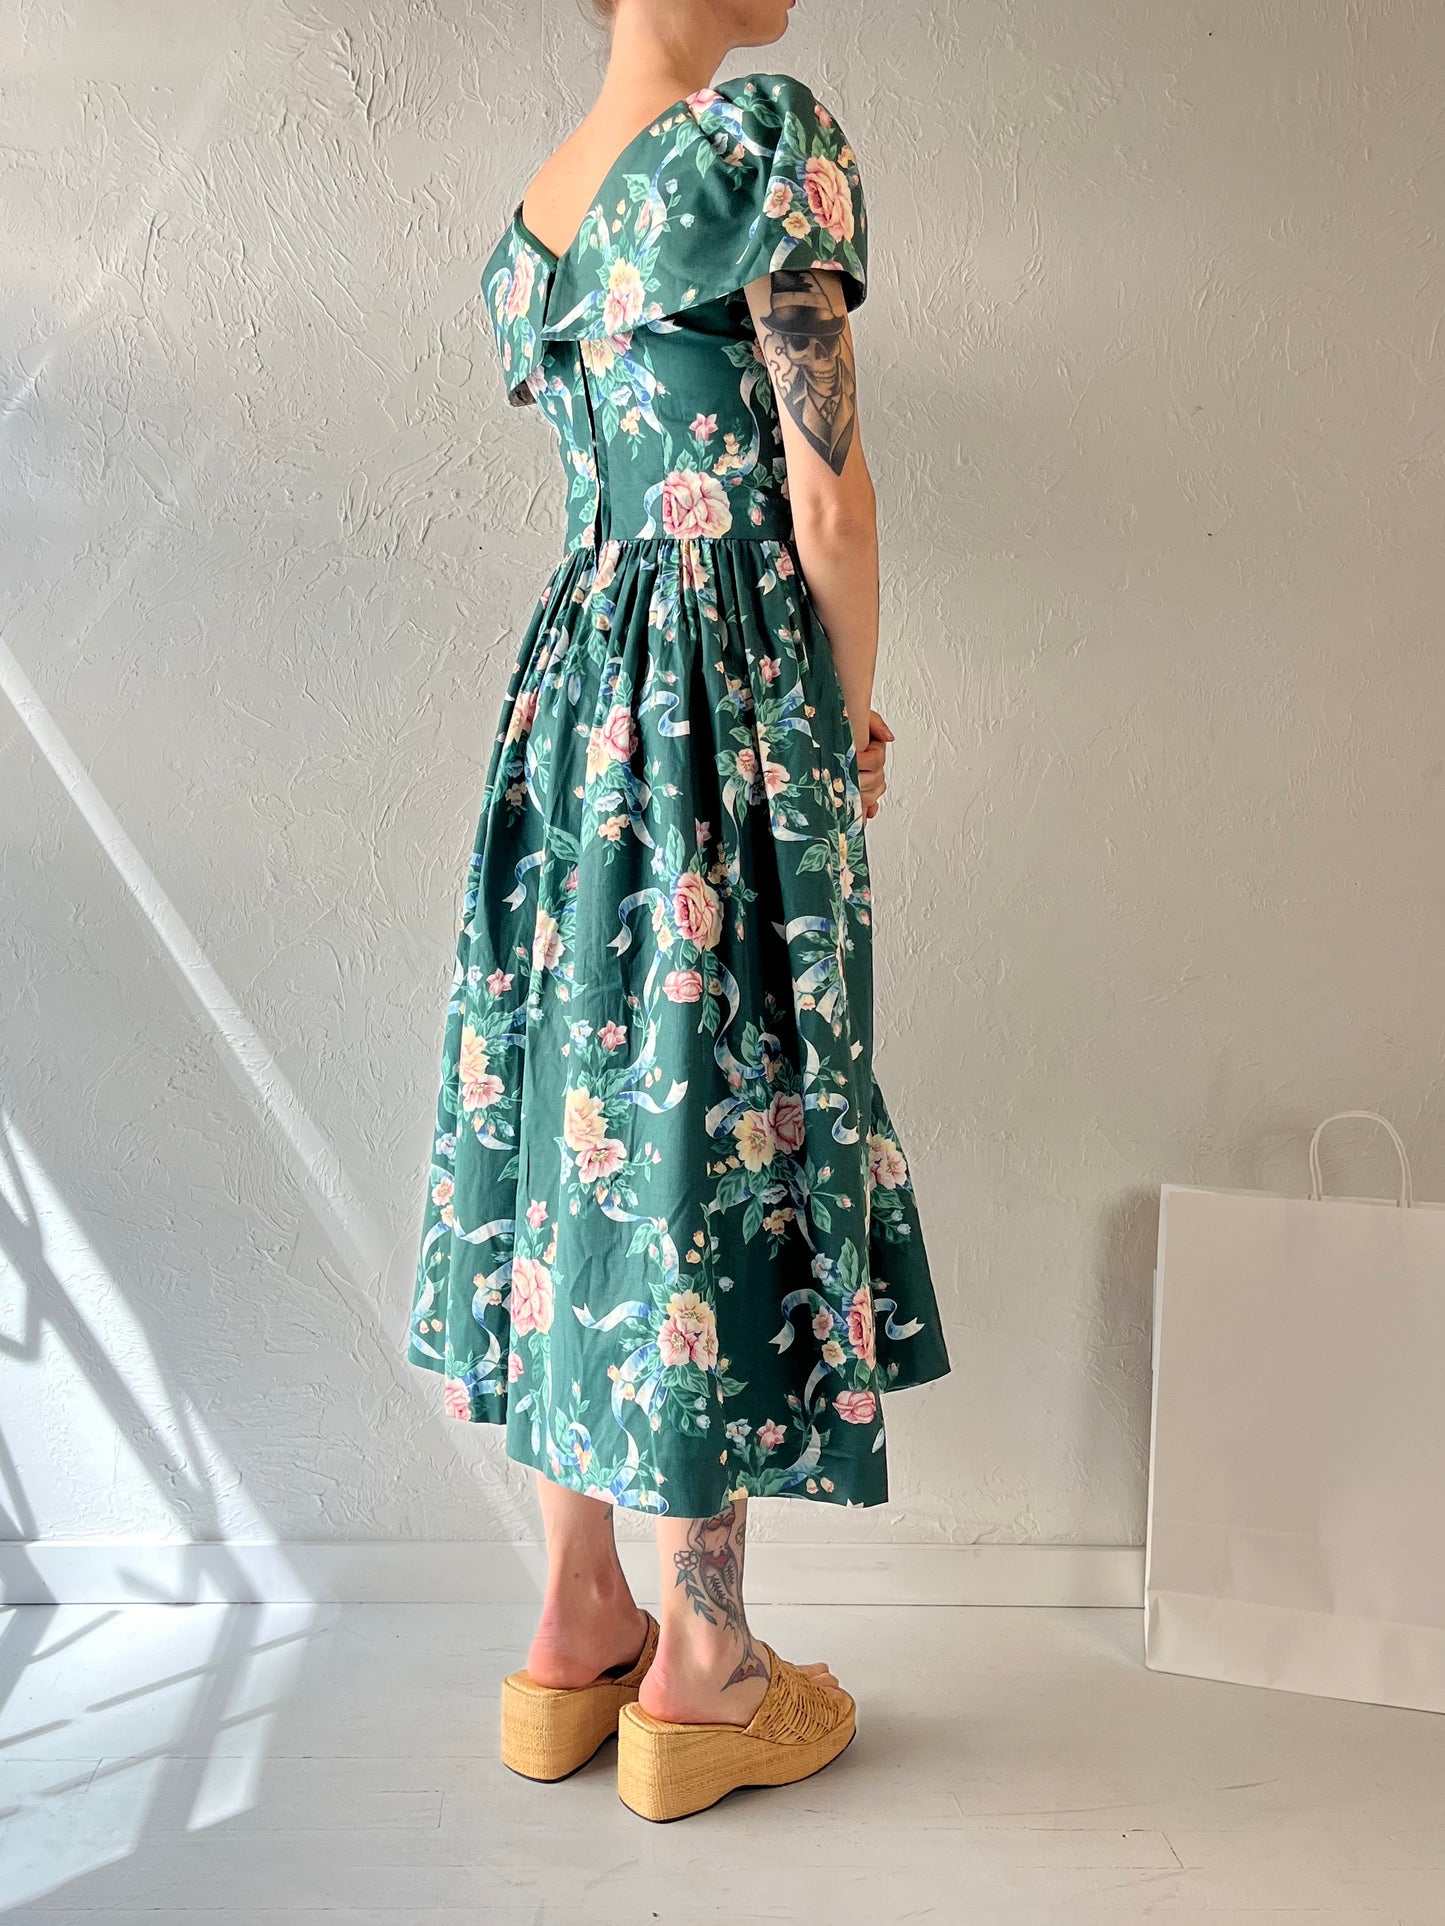 80s Handmade Green Floral Print Off The Shoulder Dress / Small